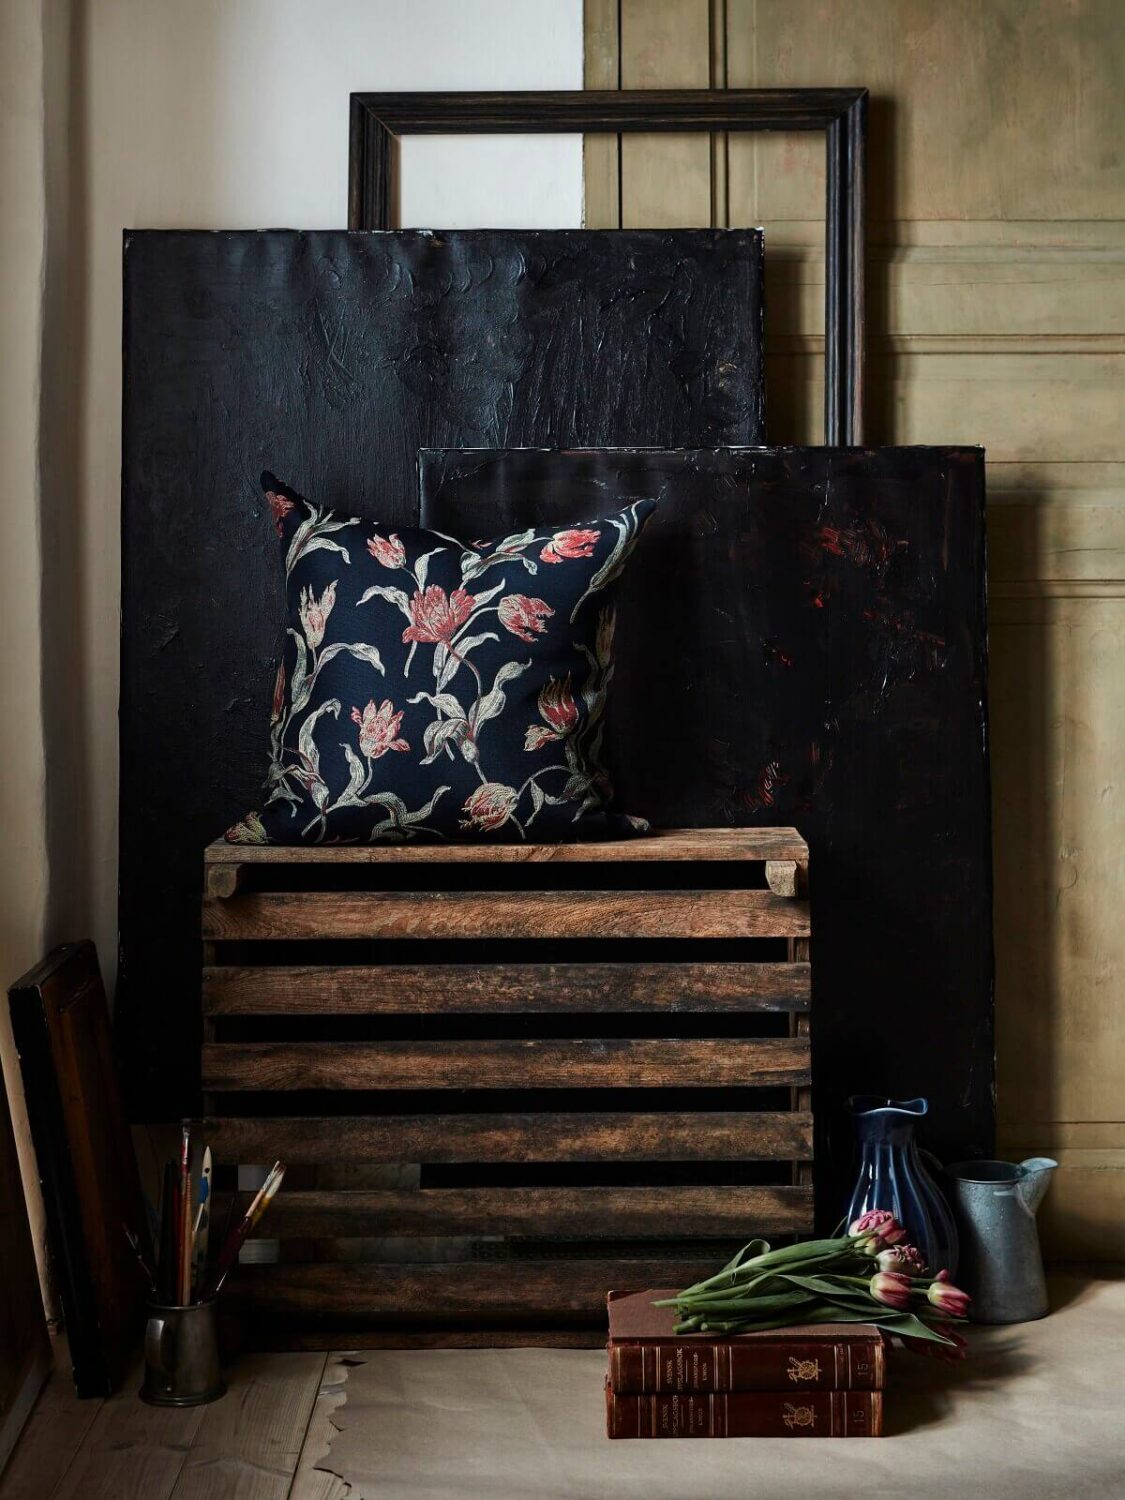 ANewIKEACollectionInspiredbyDutchMasterPainters TheNordroom A New IKEA Collection Inspired by Dutch Master Painters